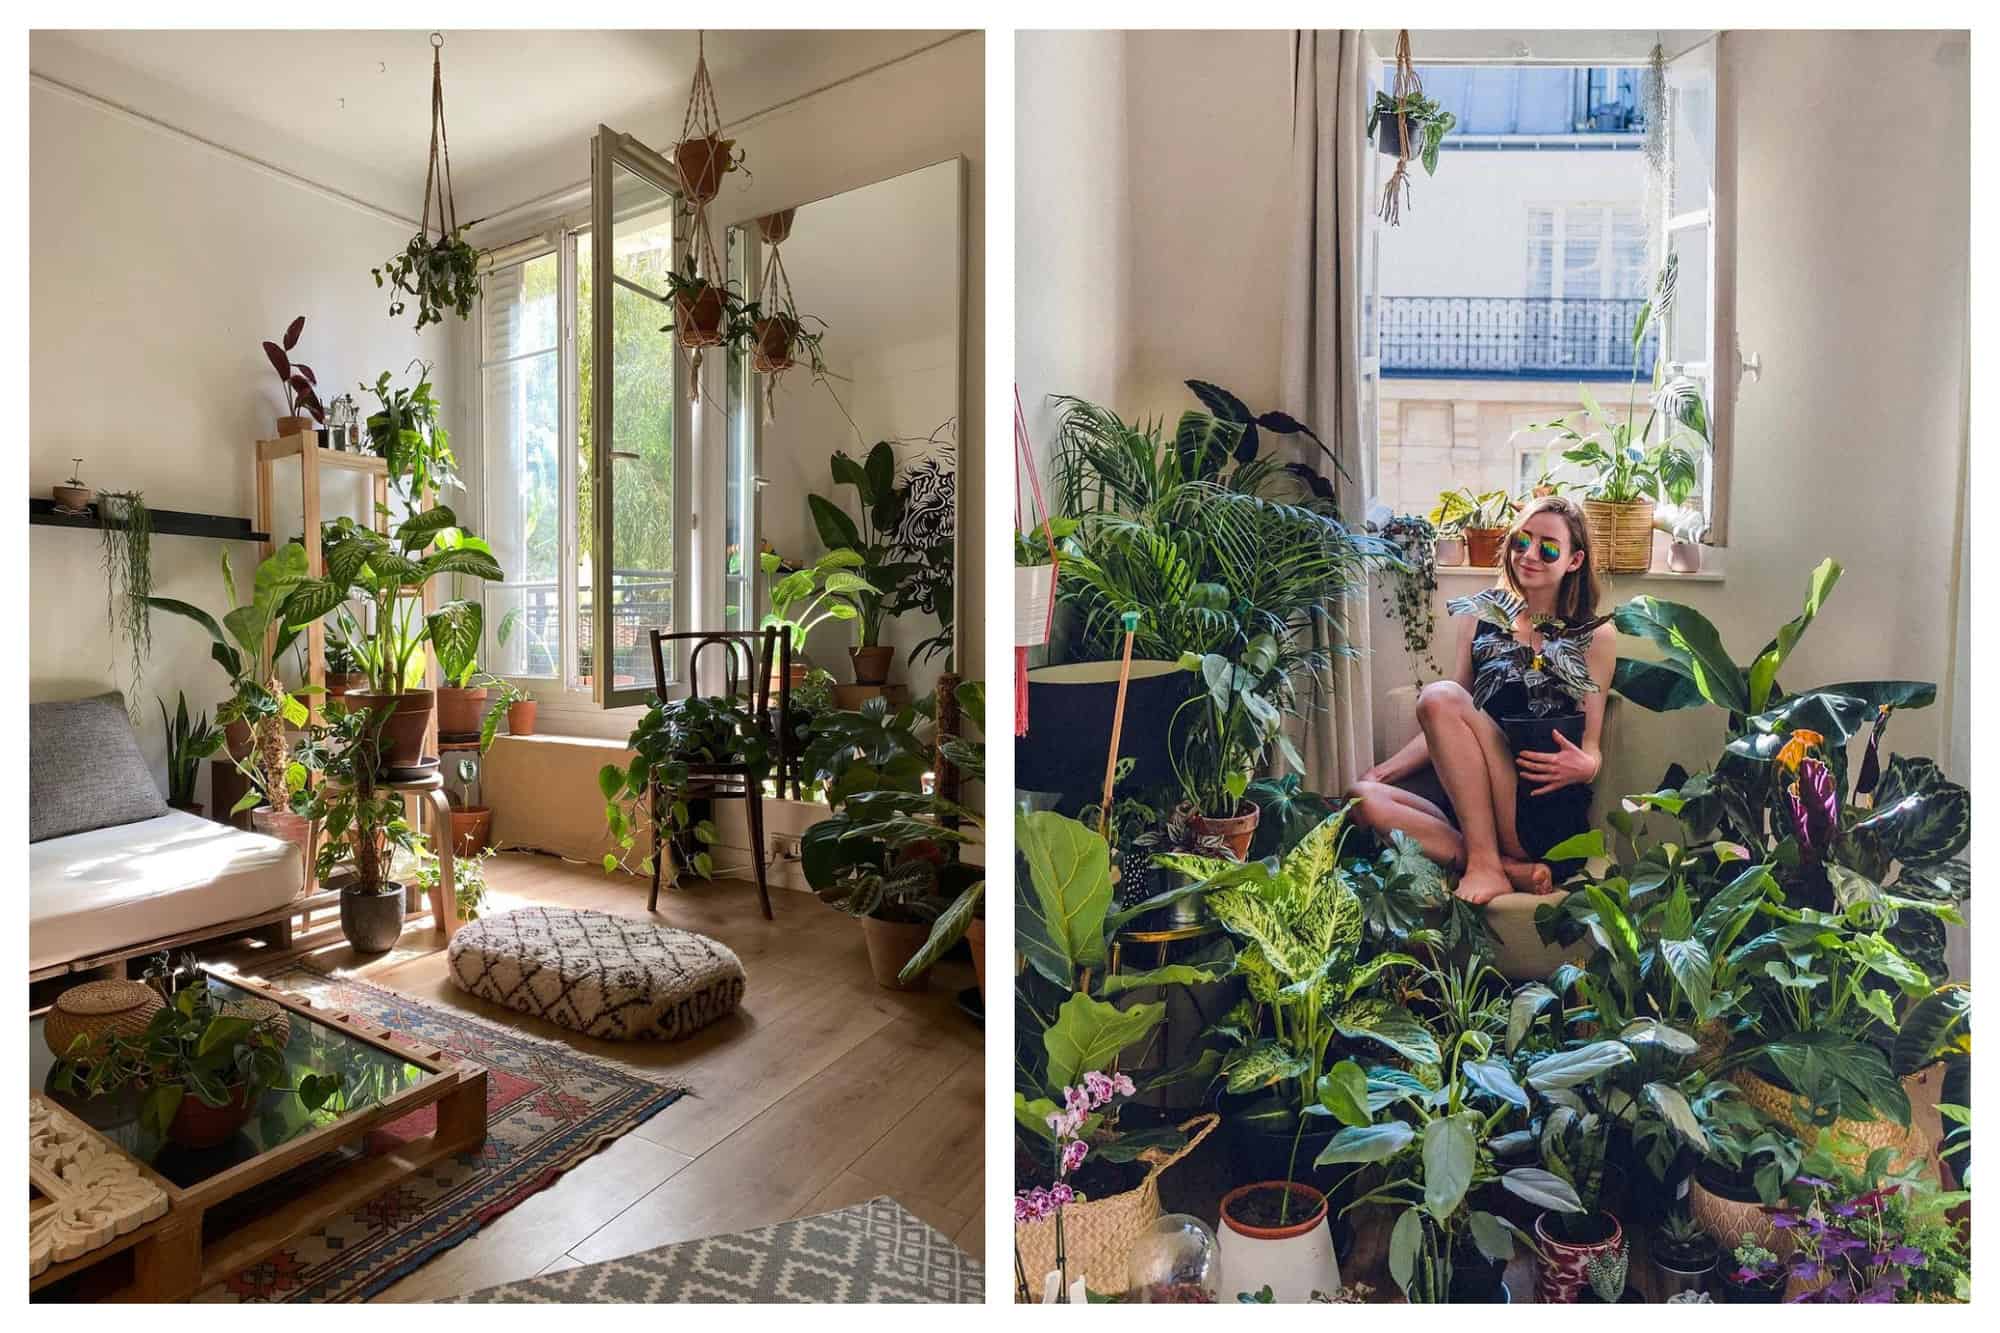 Left: A Parisian living room decorated with at least 30 types of houseplants. The giant mirror reflects more houseplants on the other side of the living room. Right: A picture of a Parisian woman sitting in her living room and surrounded by her houseplants. She is leaning against a window overlooking another recognizable Parisian building with its balcony.